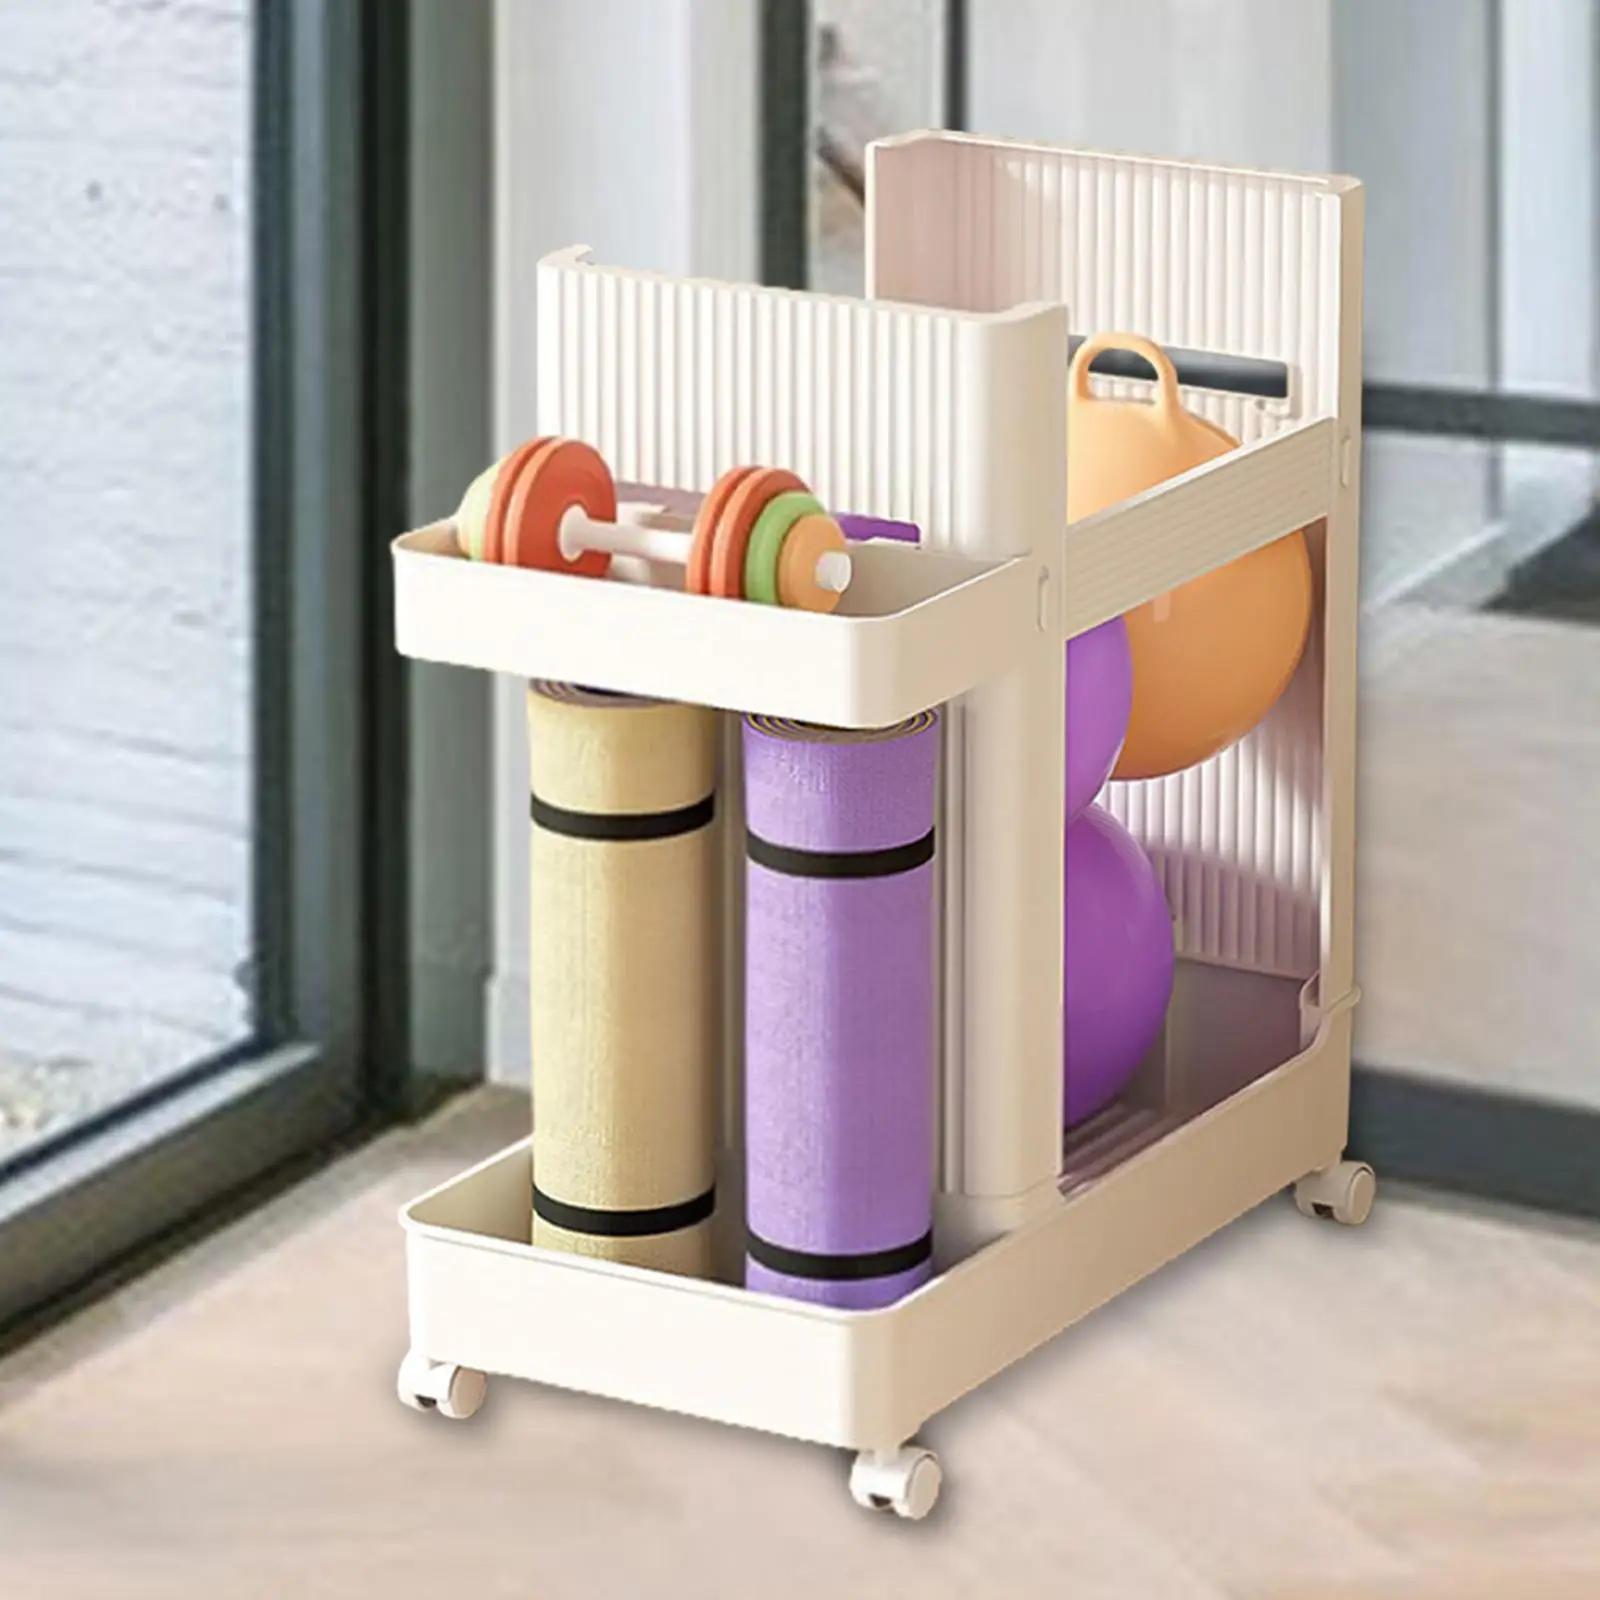 Yoga Mat Storage Rack Workout Equipment Storage OrganizerCaster Wheels Weight Rack Stand for Resistance Bands Foam R